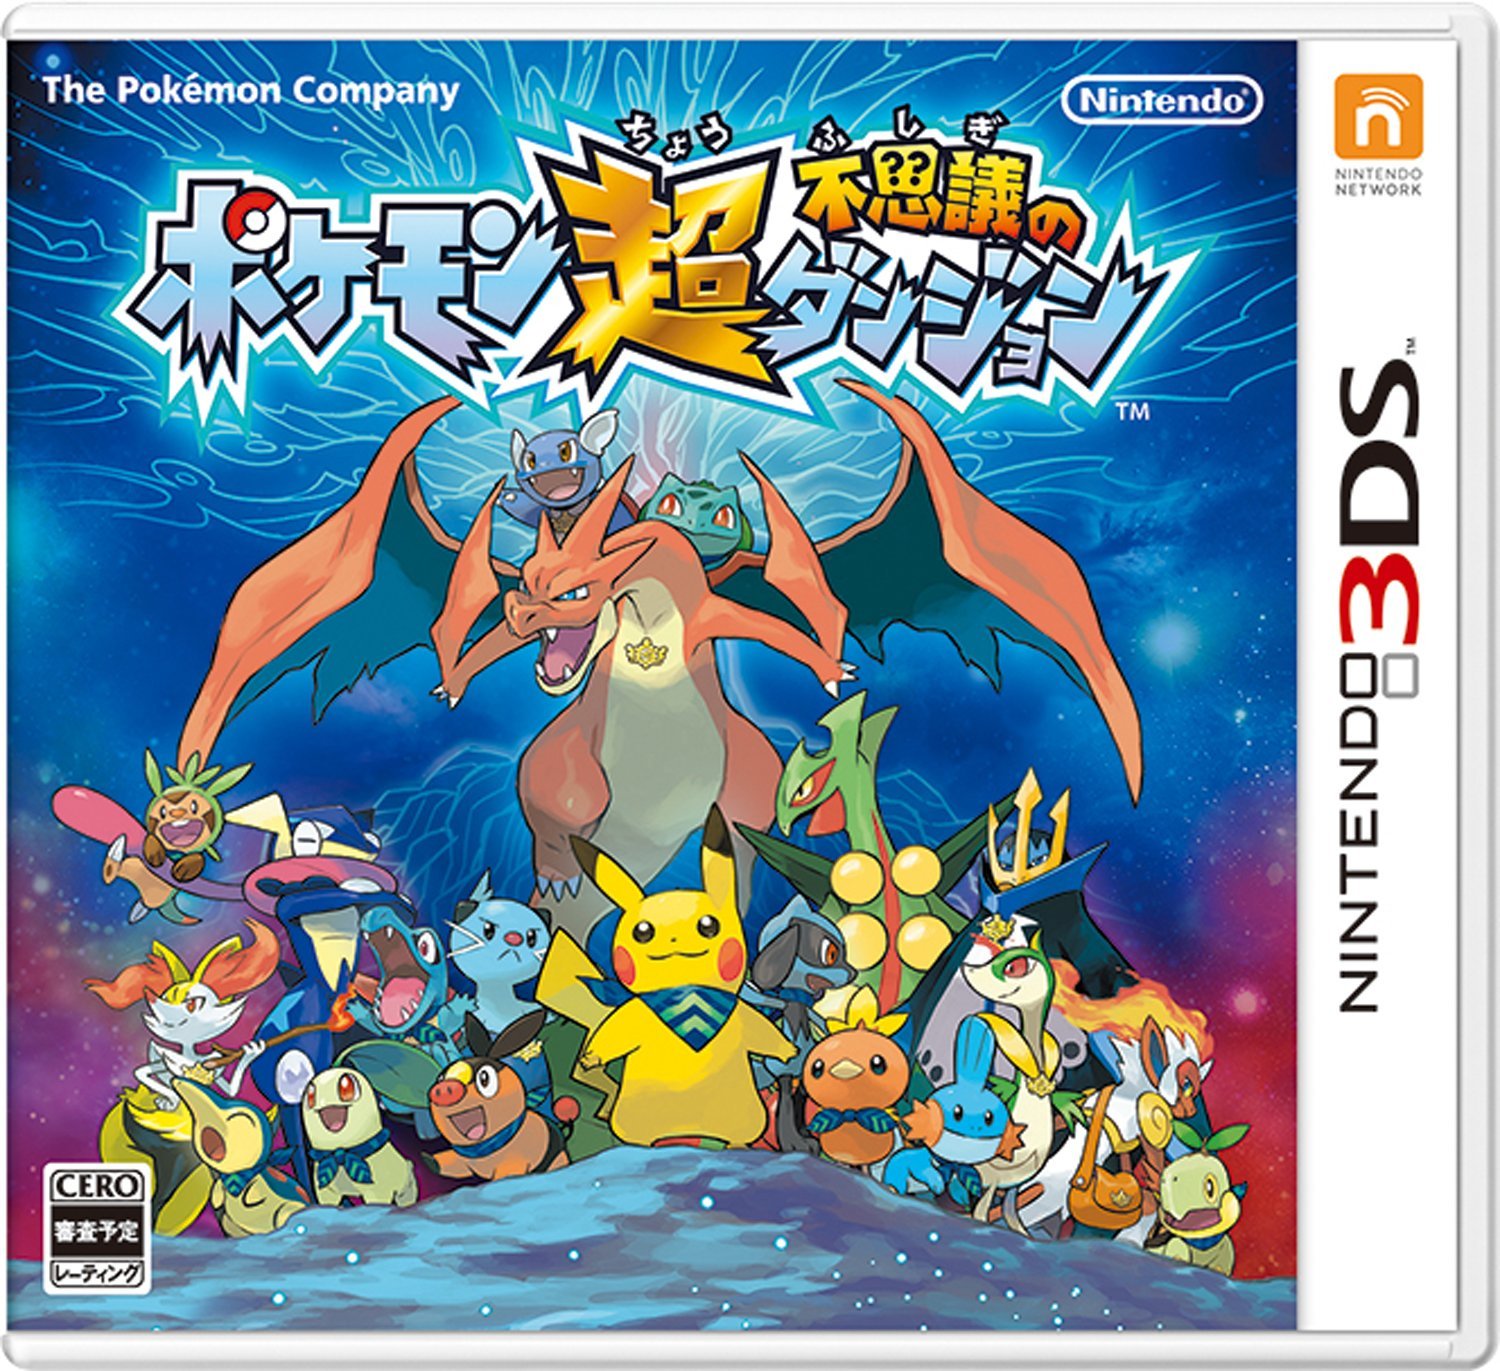 super mystery dungeon pokemon .3ds rom decrypted